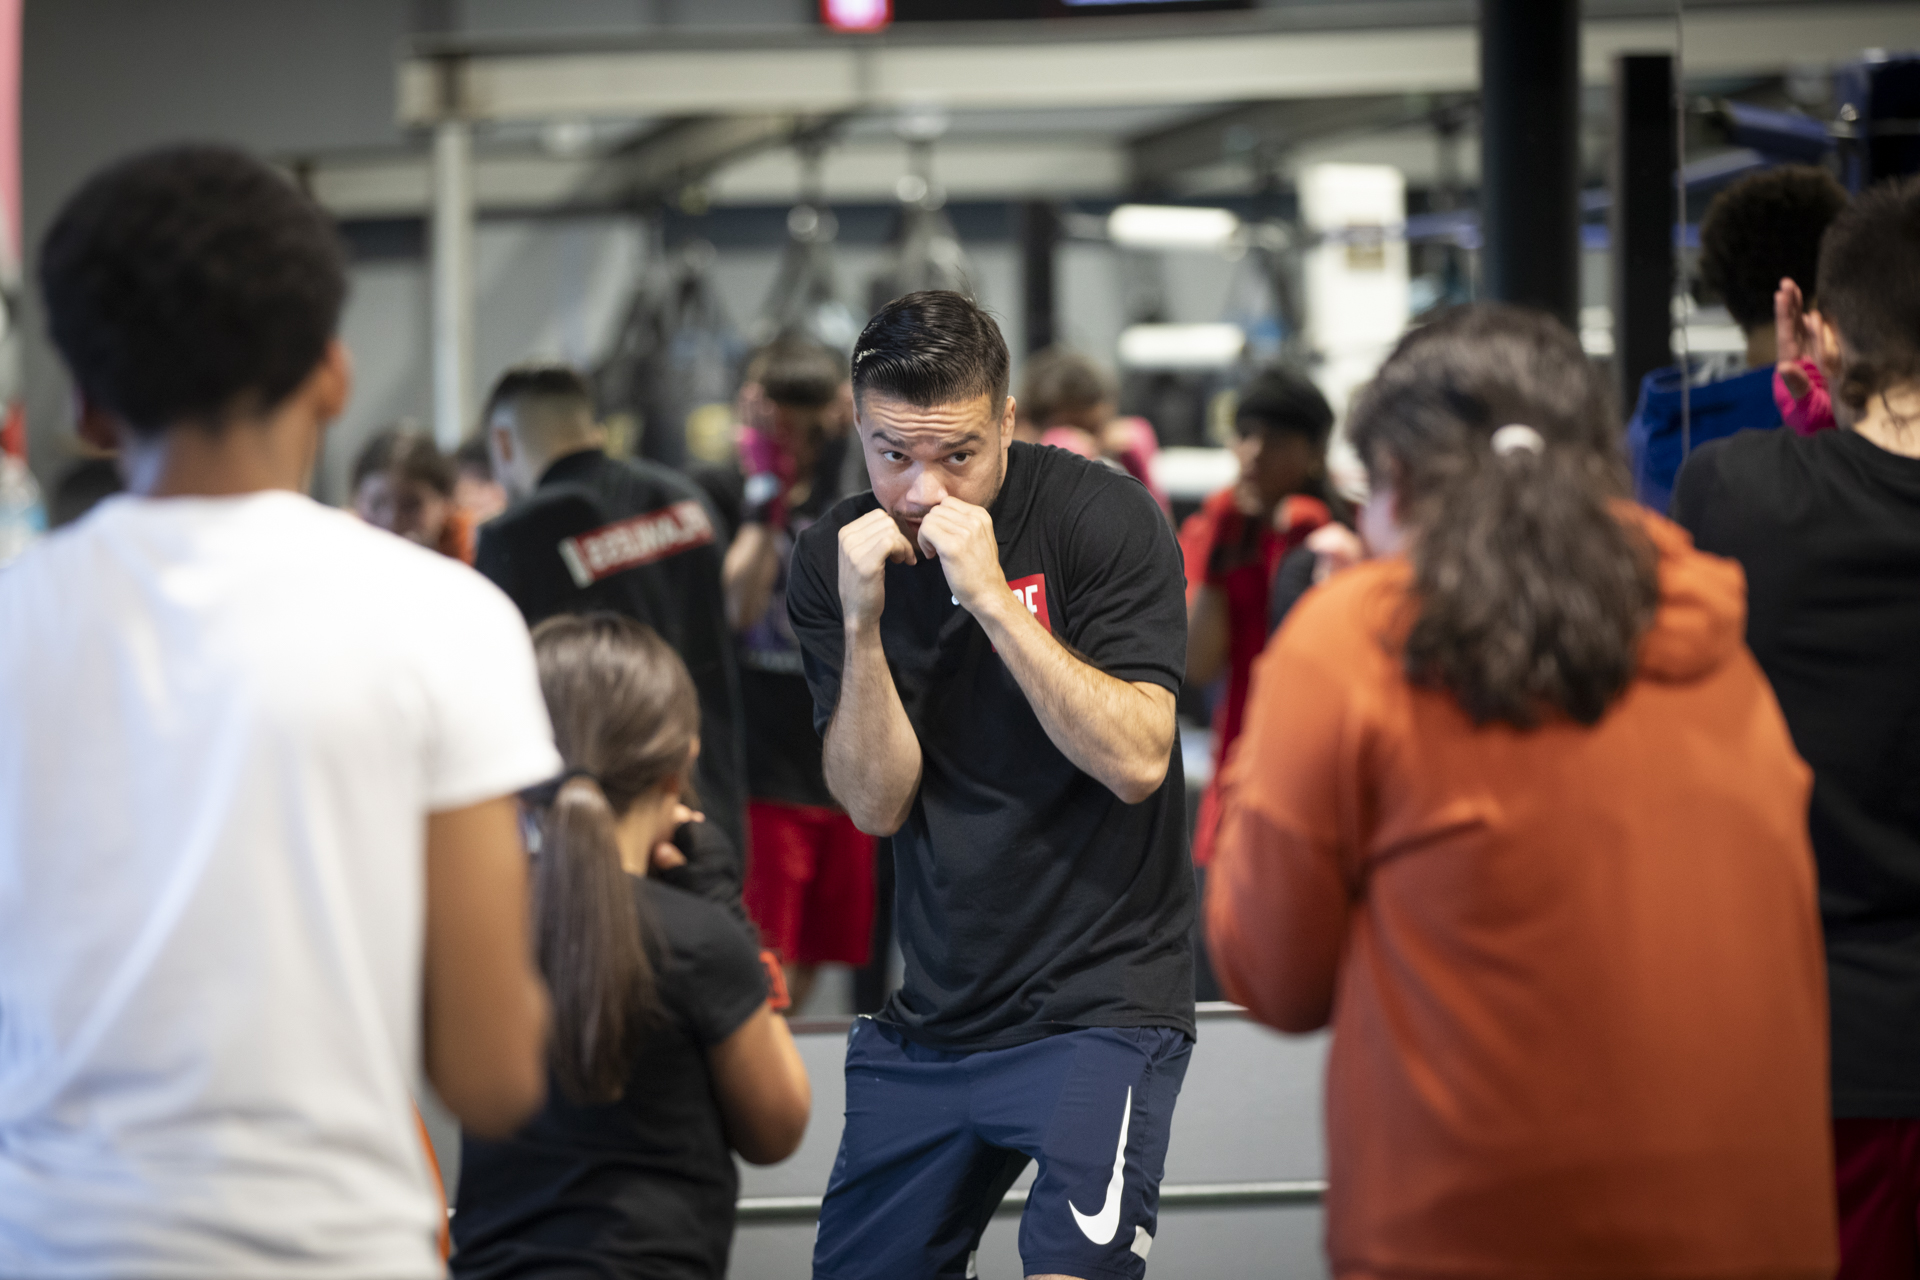 Alumnus Kevin Montaño works out with the next generation of boxers.